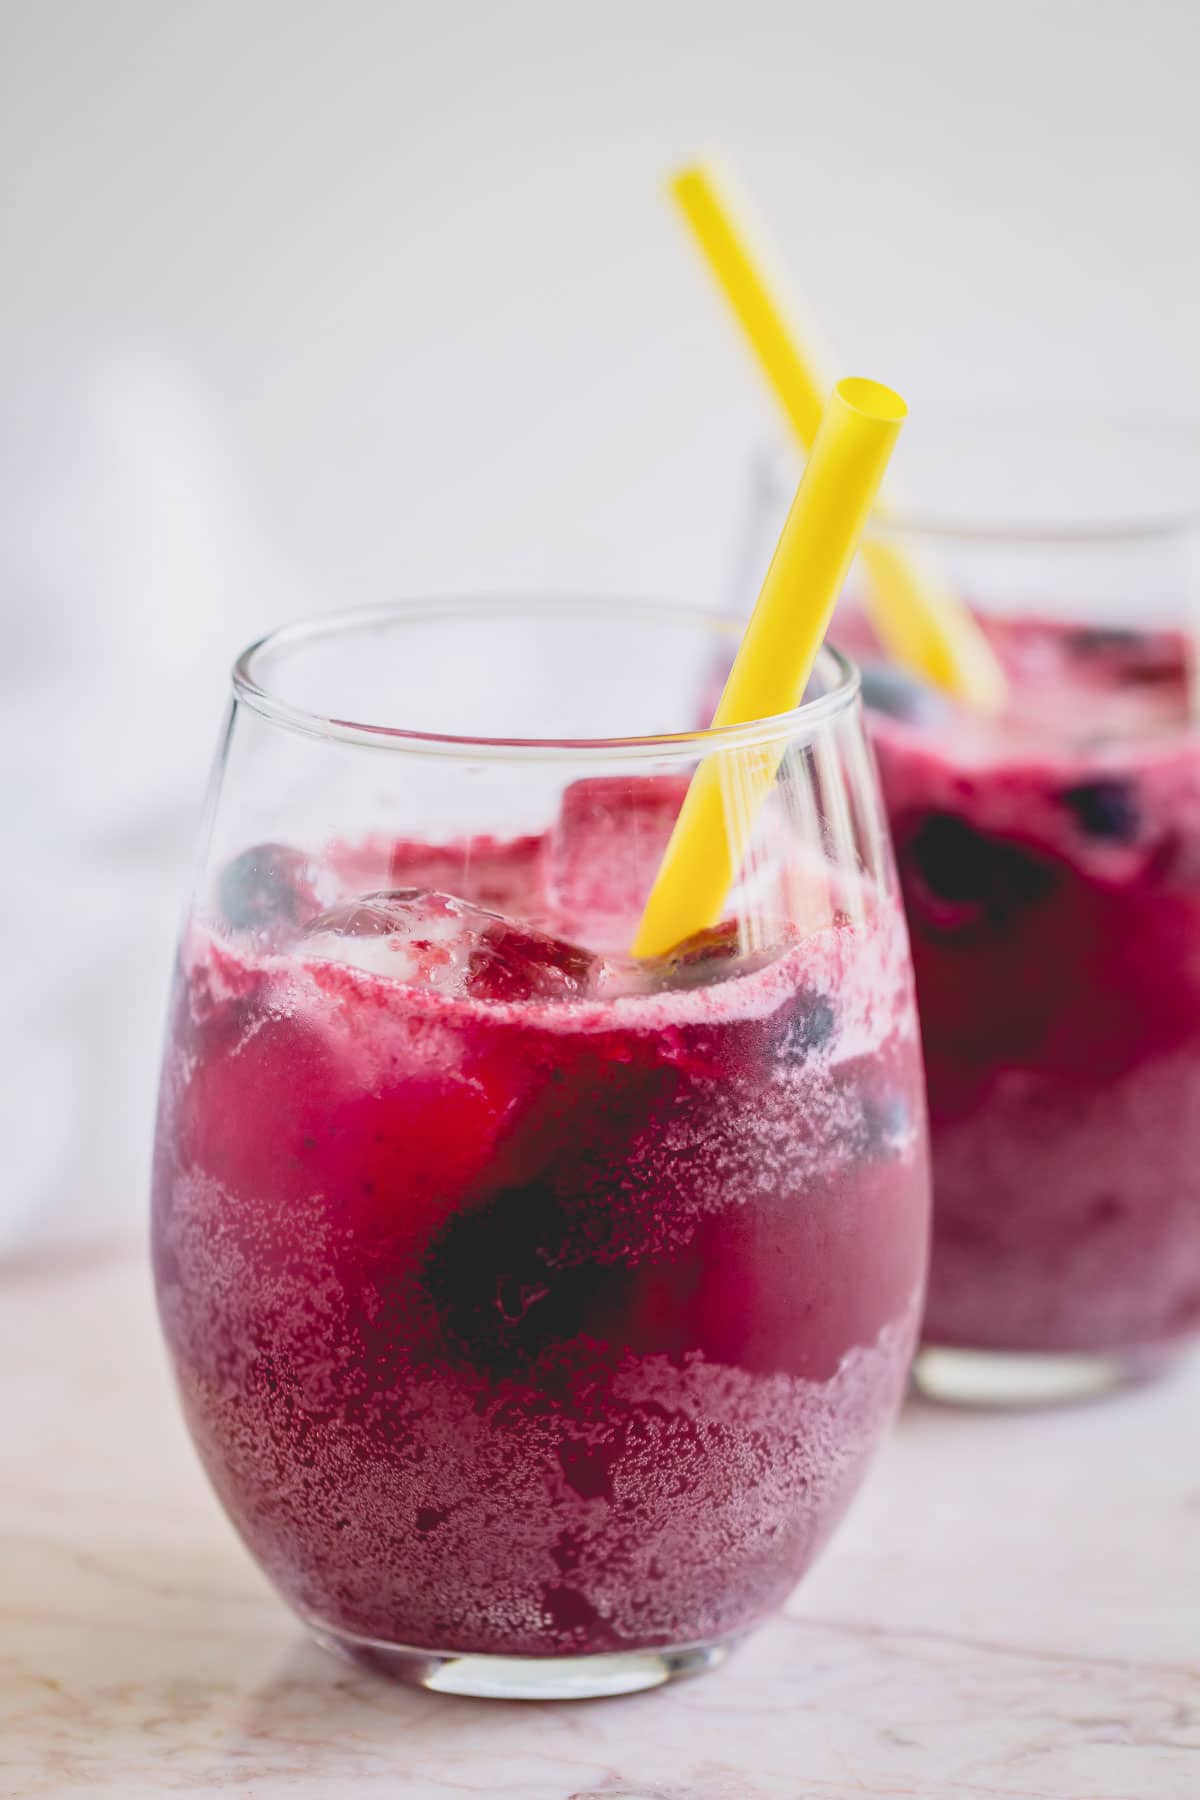 Glass of sparkling blueberry lemonade with a yellow straw.